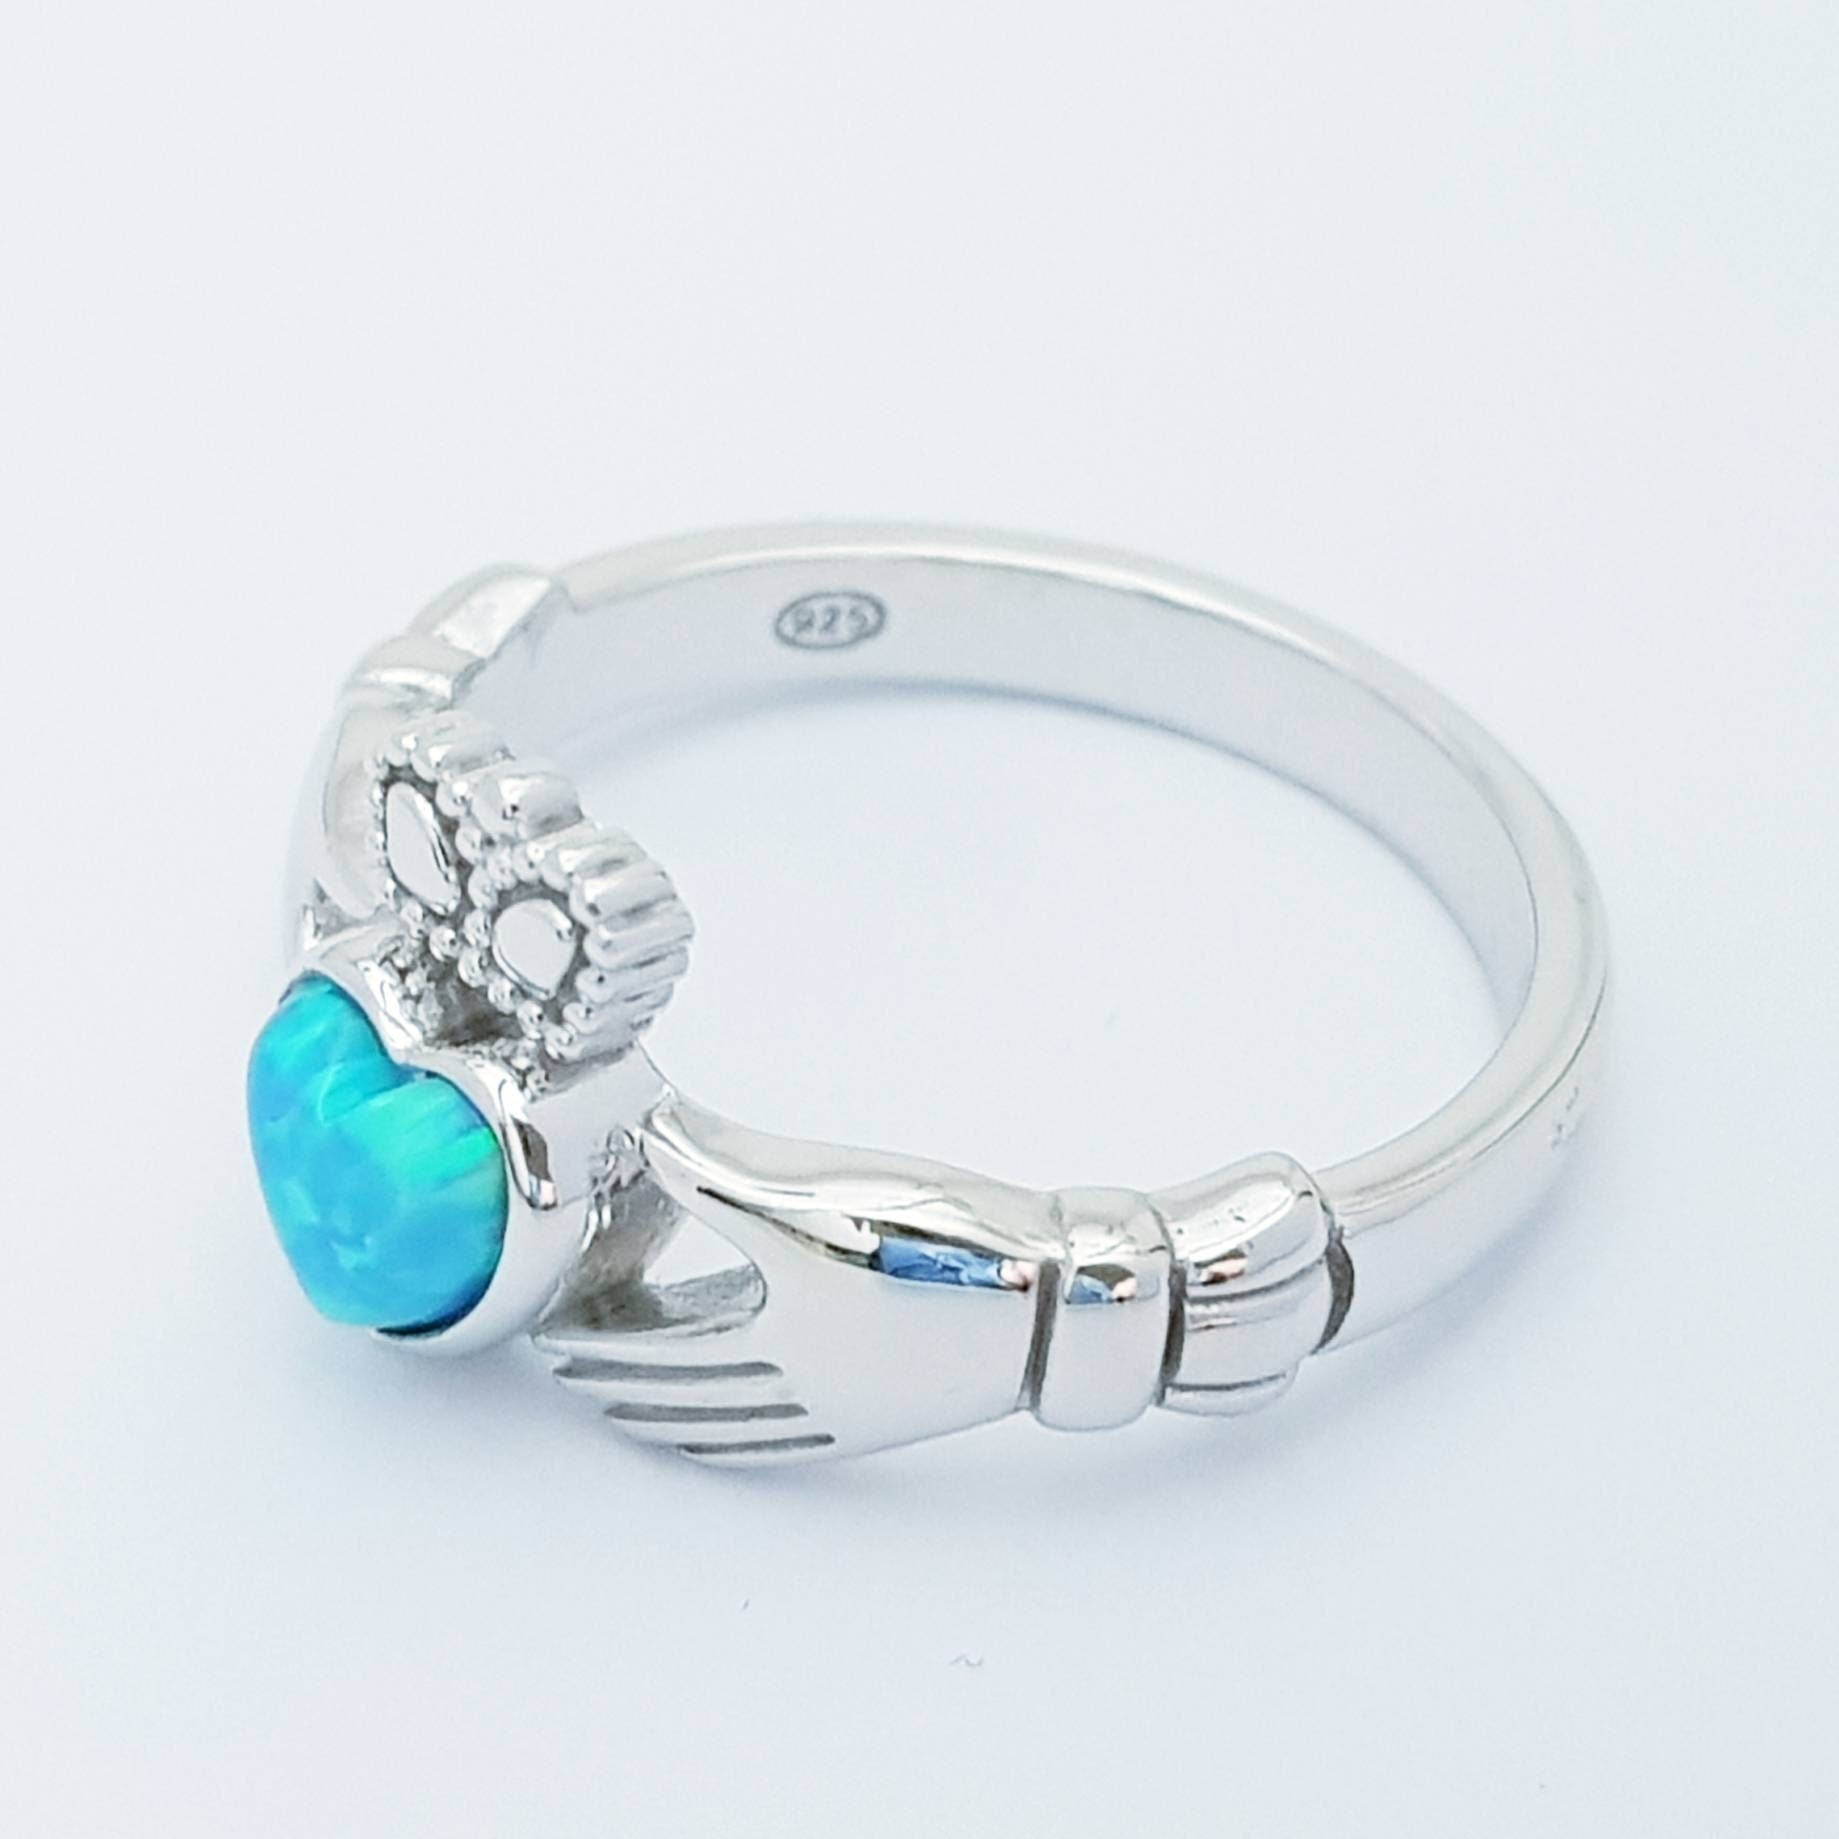 Sterling Silver Claddagh ring set with opal stone, October birthstone